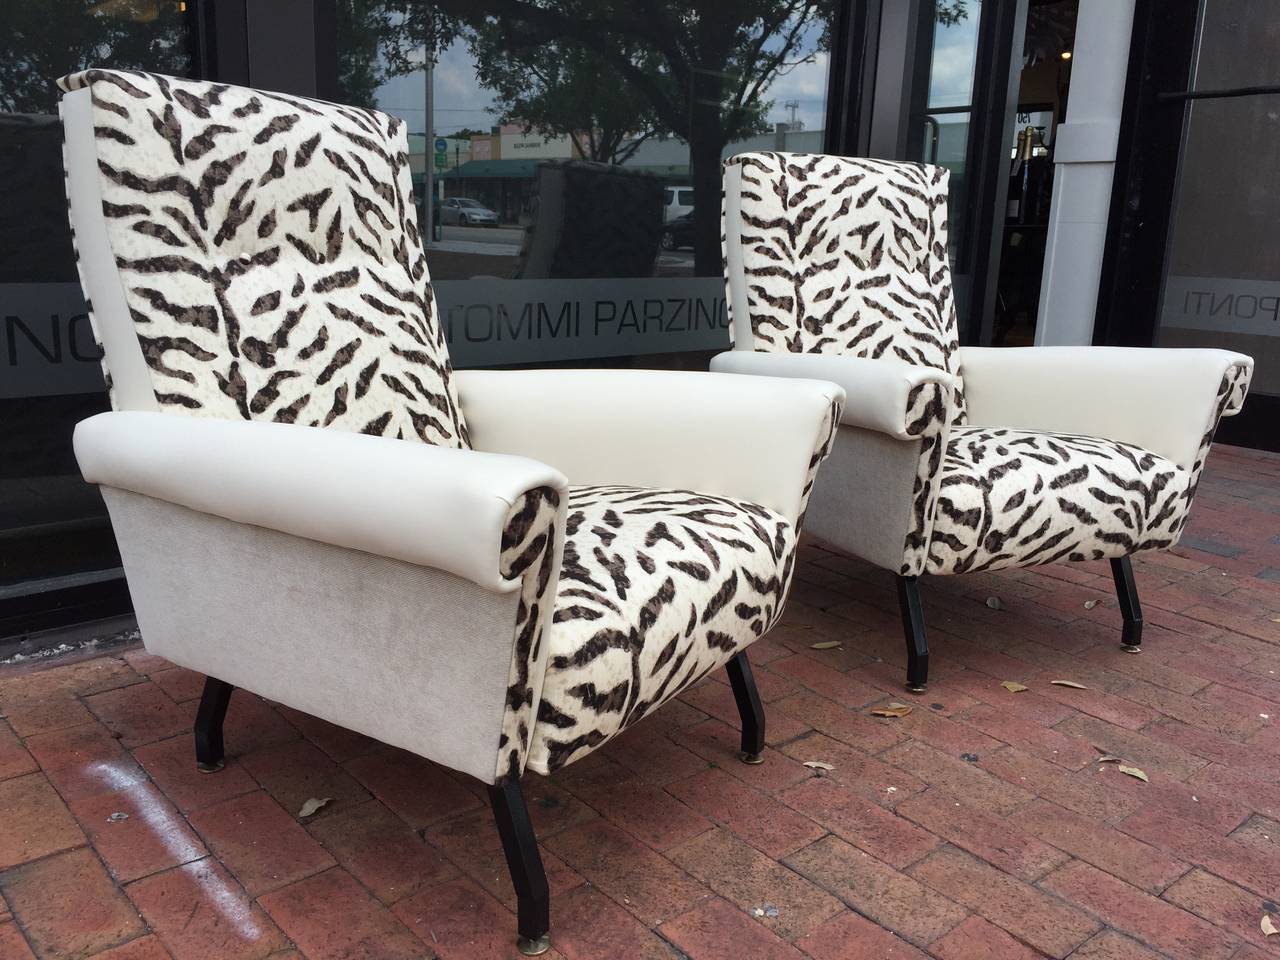 1950s Italian chairs newly restored black metal geometrical legs with brass gliders (original).

Upholstered in three different materials (Animal print cotton, ivory leatherette on the armrests, and complimentary ivory velvet side panels). Note: